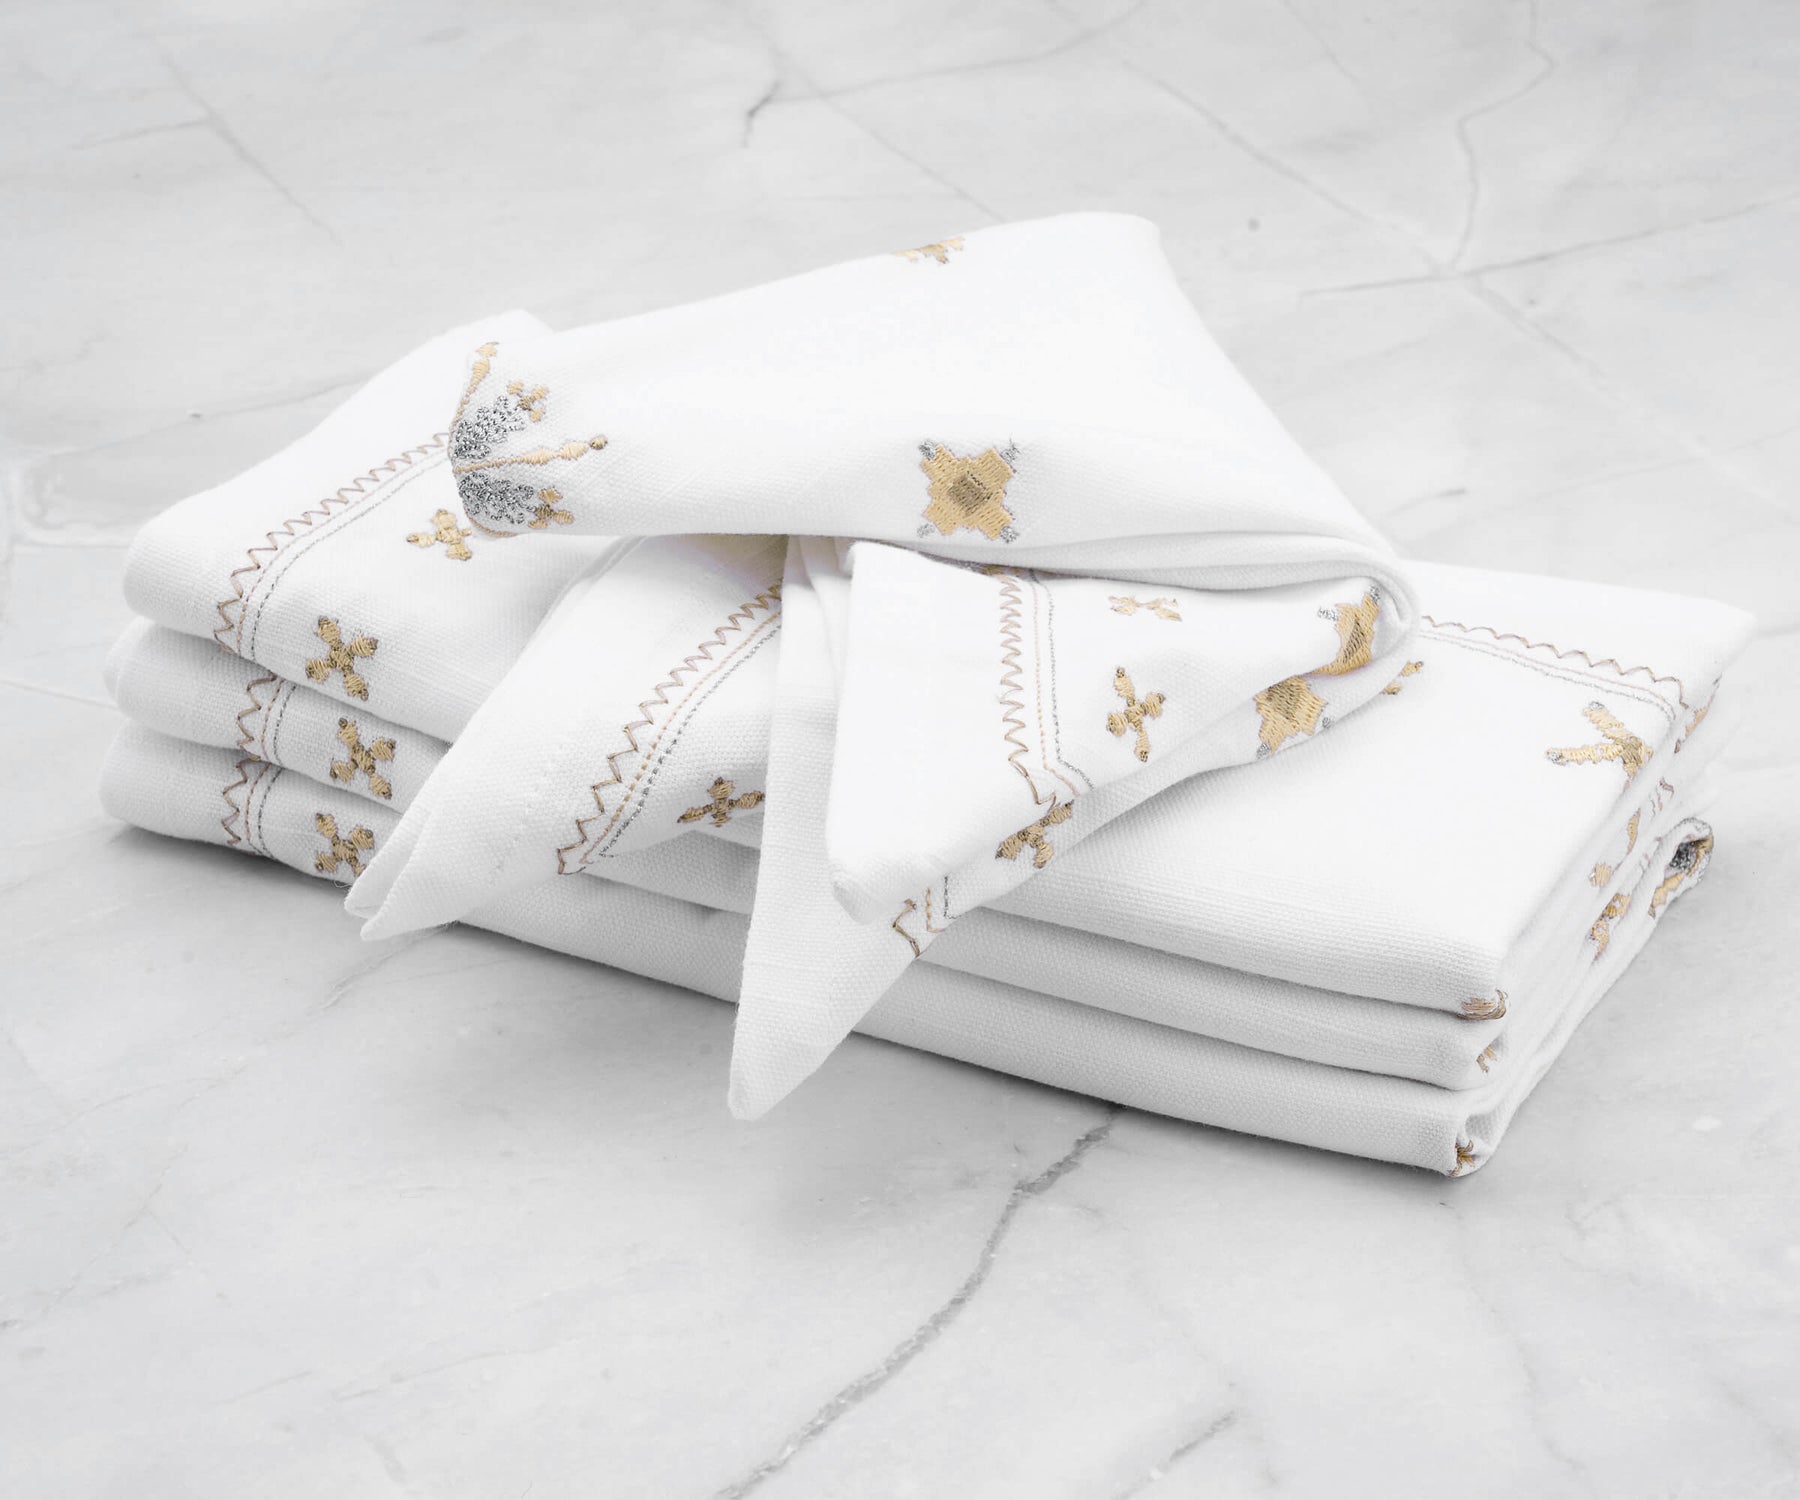 Durable white napkins resist tearing or ripping, even when subjected to heavy use.